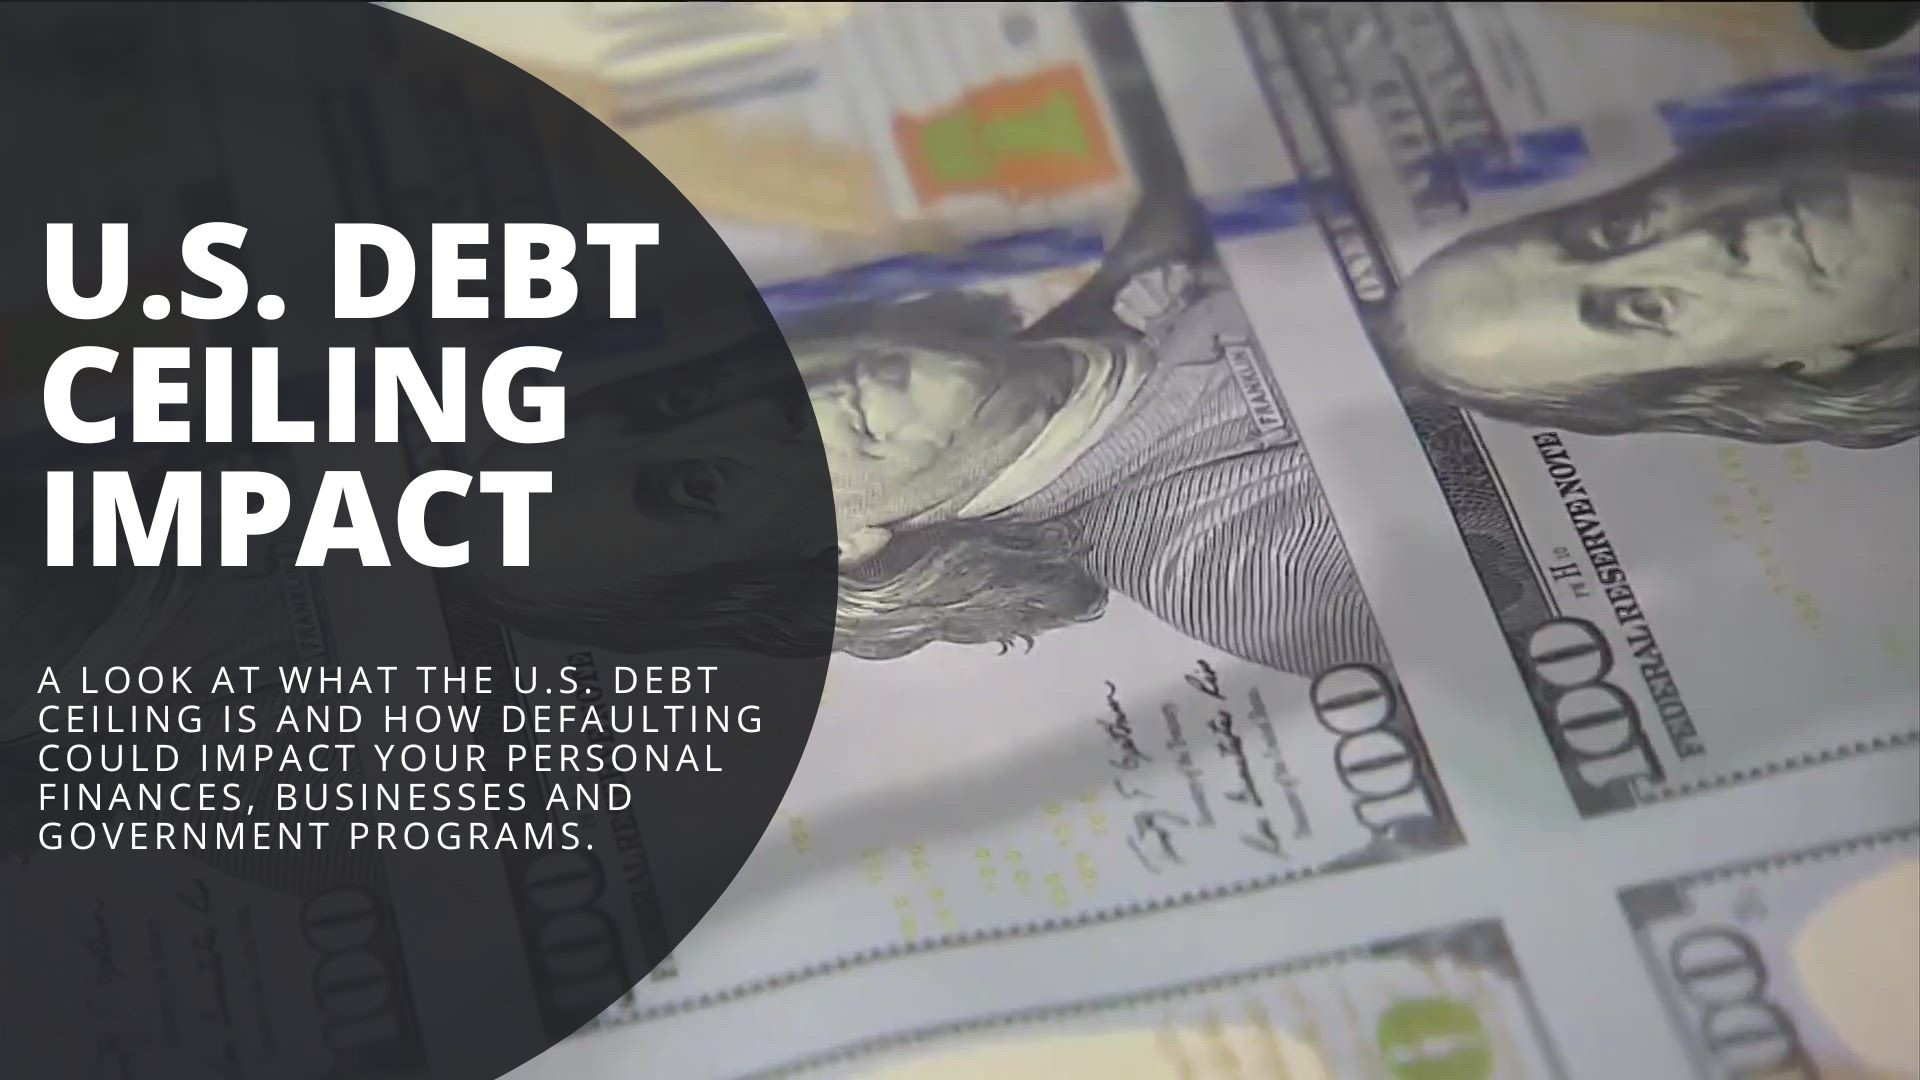 A look at what the U.S. debt ceiling is and how defaulting could impact your personal finances, businesses and government programs.